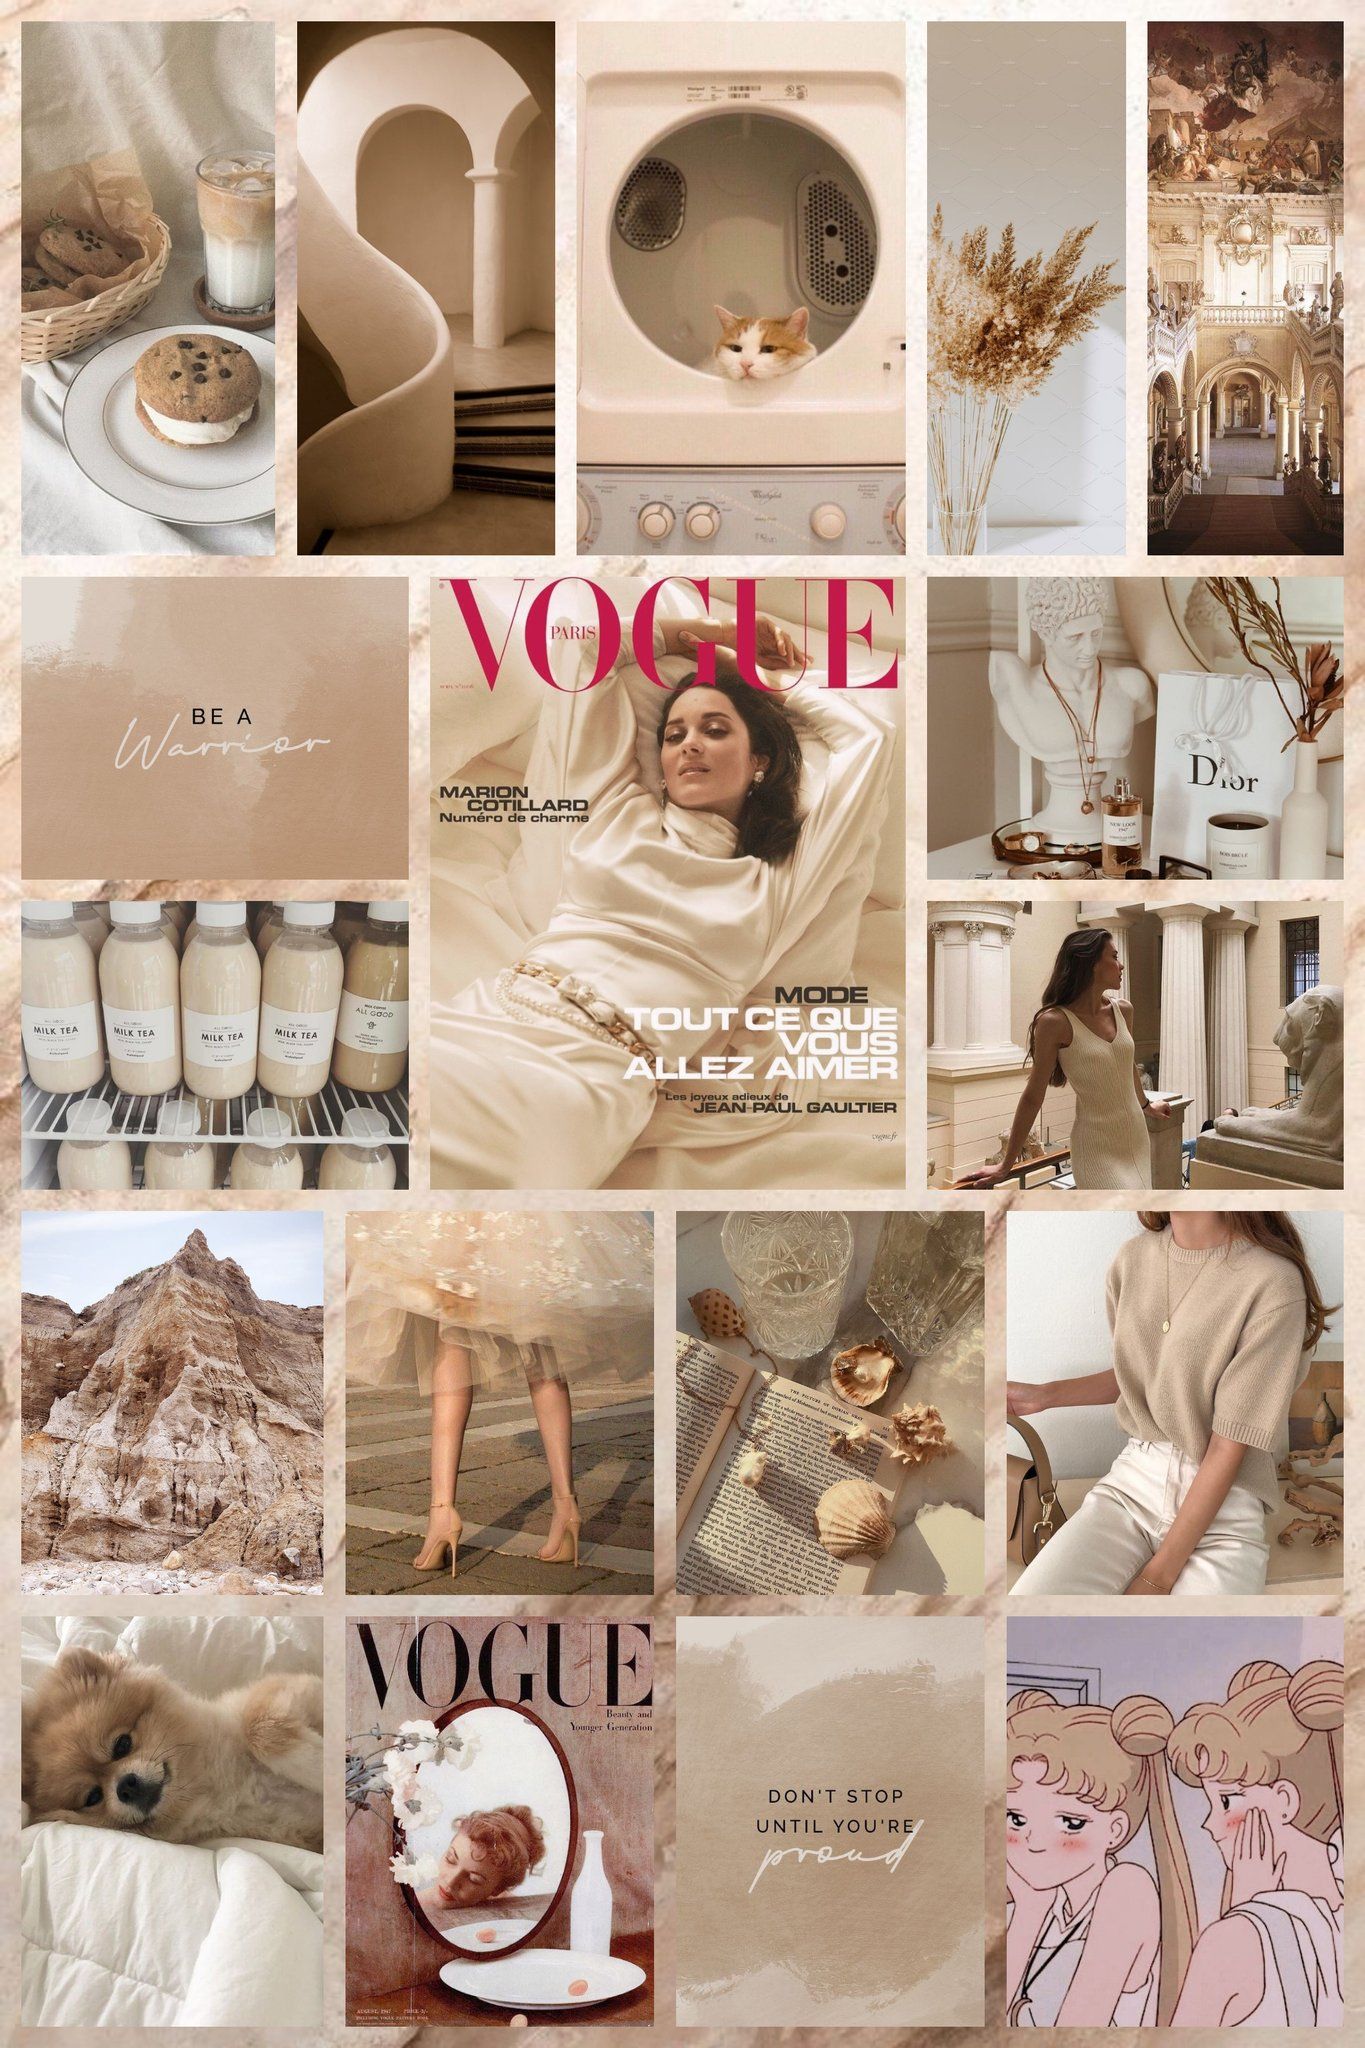 A collage of pictures from vogue magazine - Beige, collage, Vogue, fashion, Dior, makeup